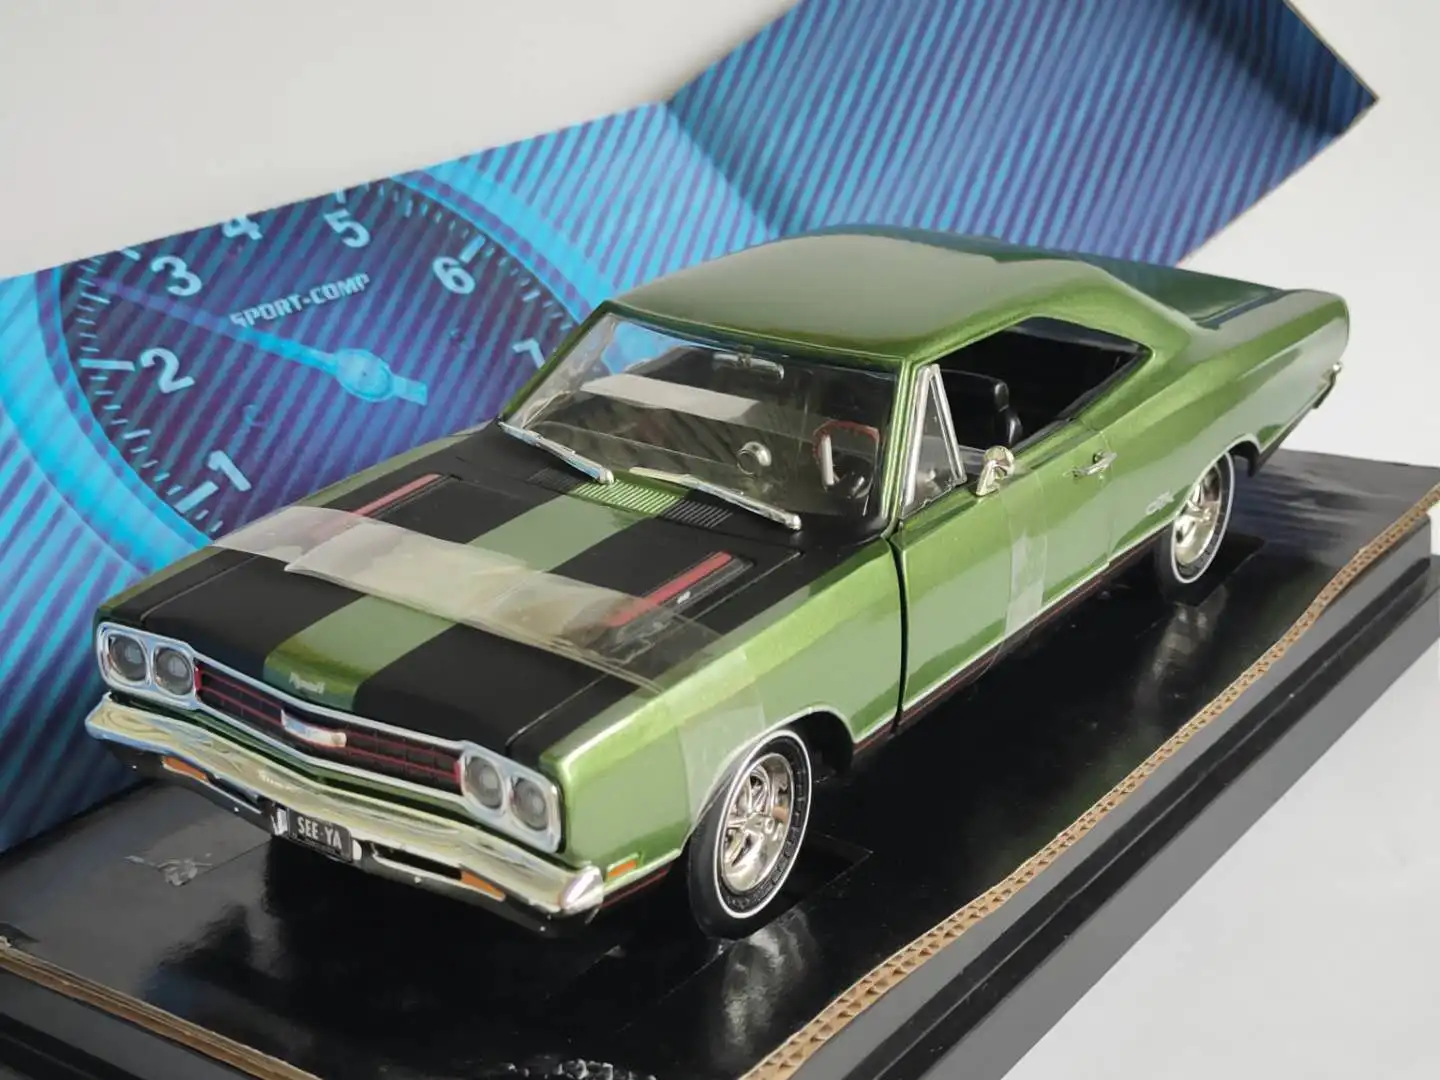 

ERTL 1:18 Plymouth GTX 1969 Vintage Car Alloy Fully Open Simulation Limited Edition Alloy Metal Static Car Model Toy Gift